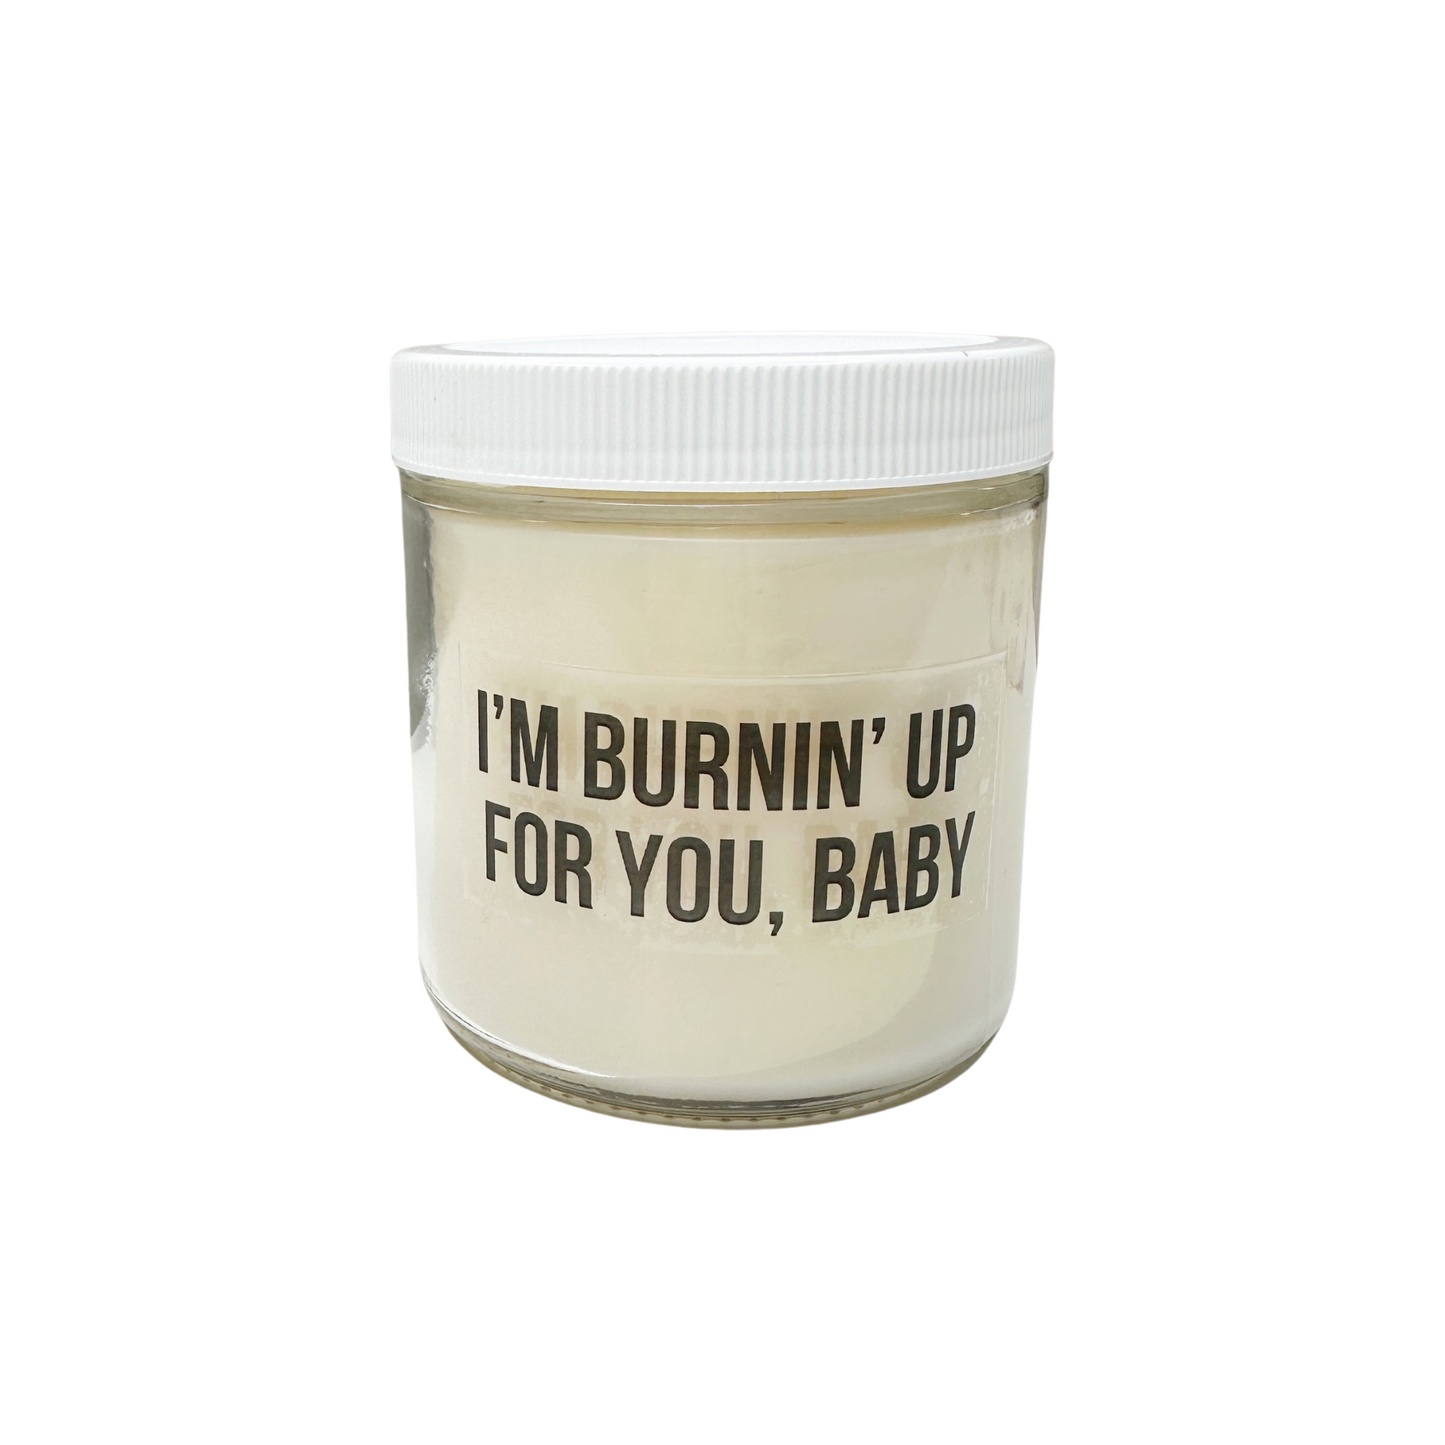 I'm Burnin' Up for You, Baby - Recycled Candle